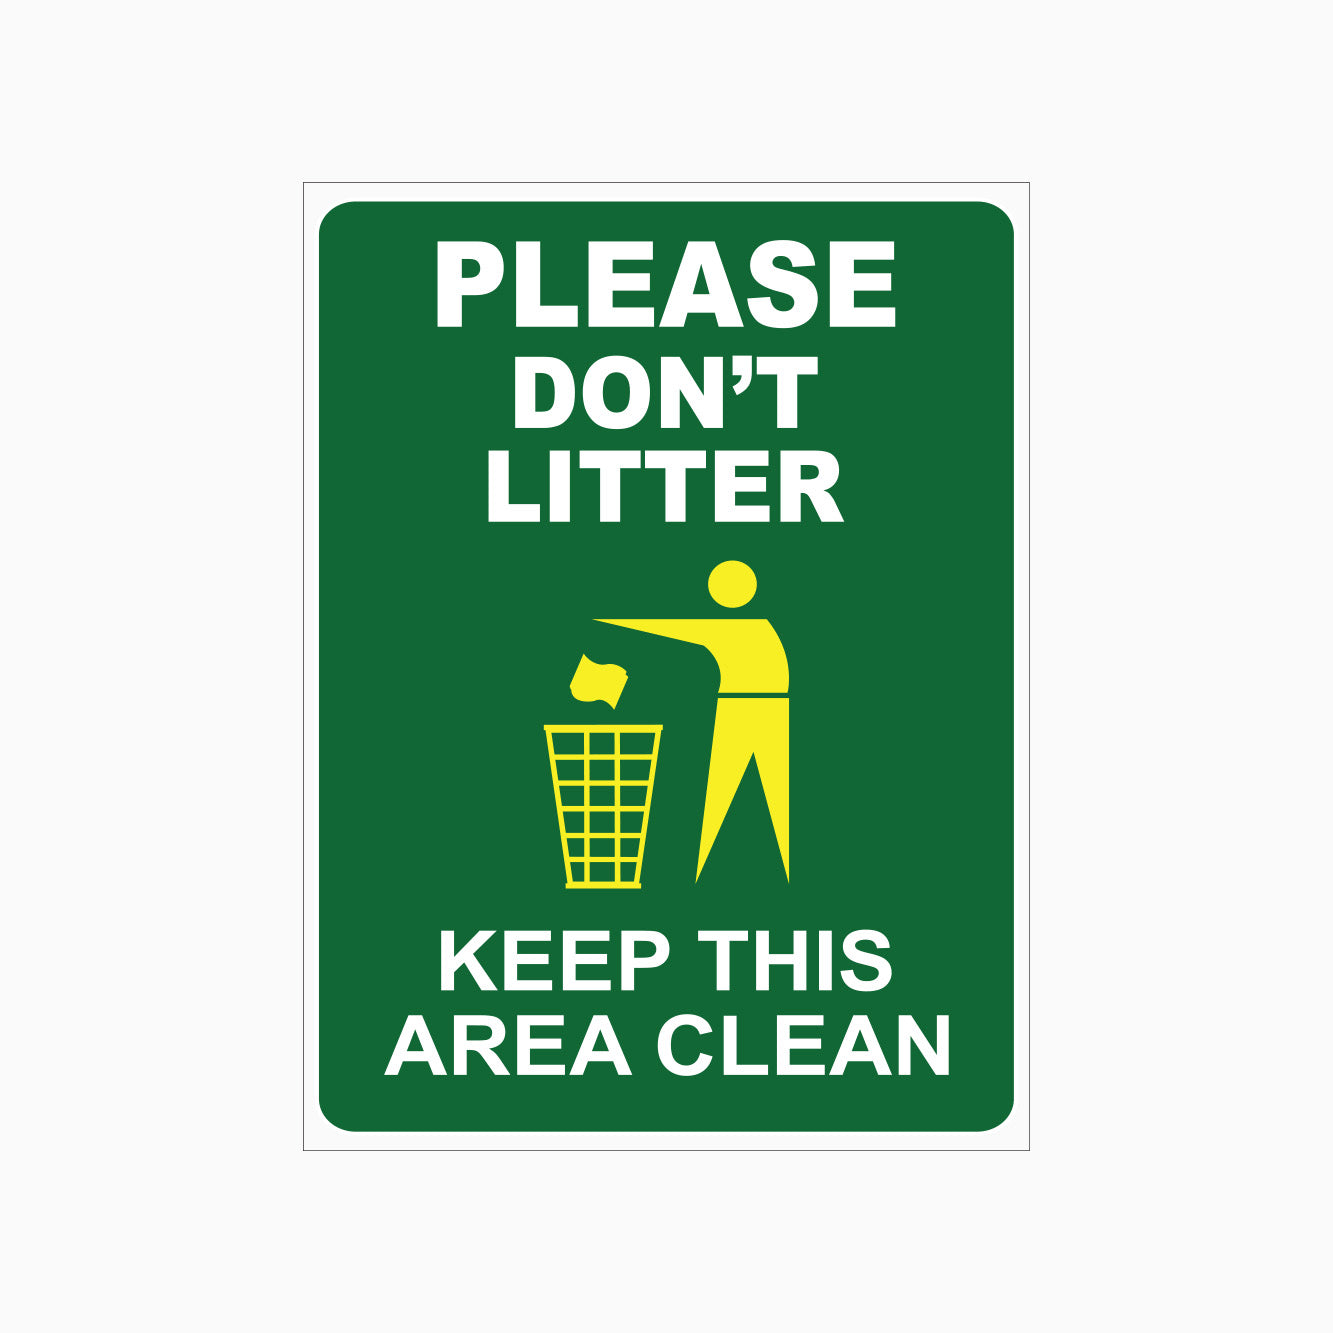 PLEASE DON'T LITTER KEEP THIS AREA CLEAN SIGN. -  BIN SIGNS IN AUSTRALIA